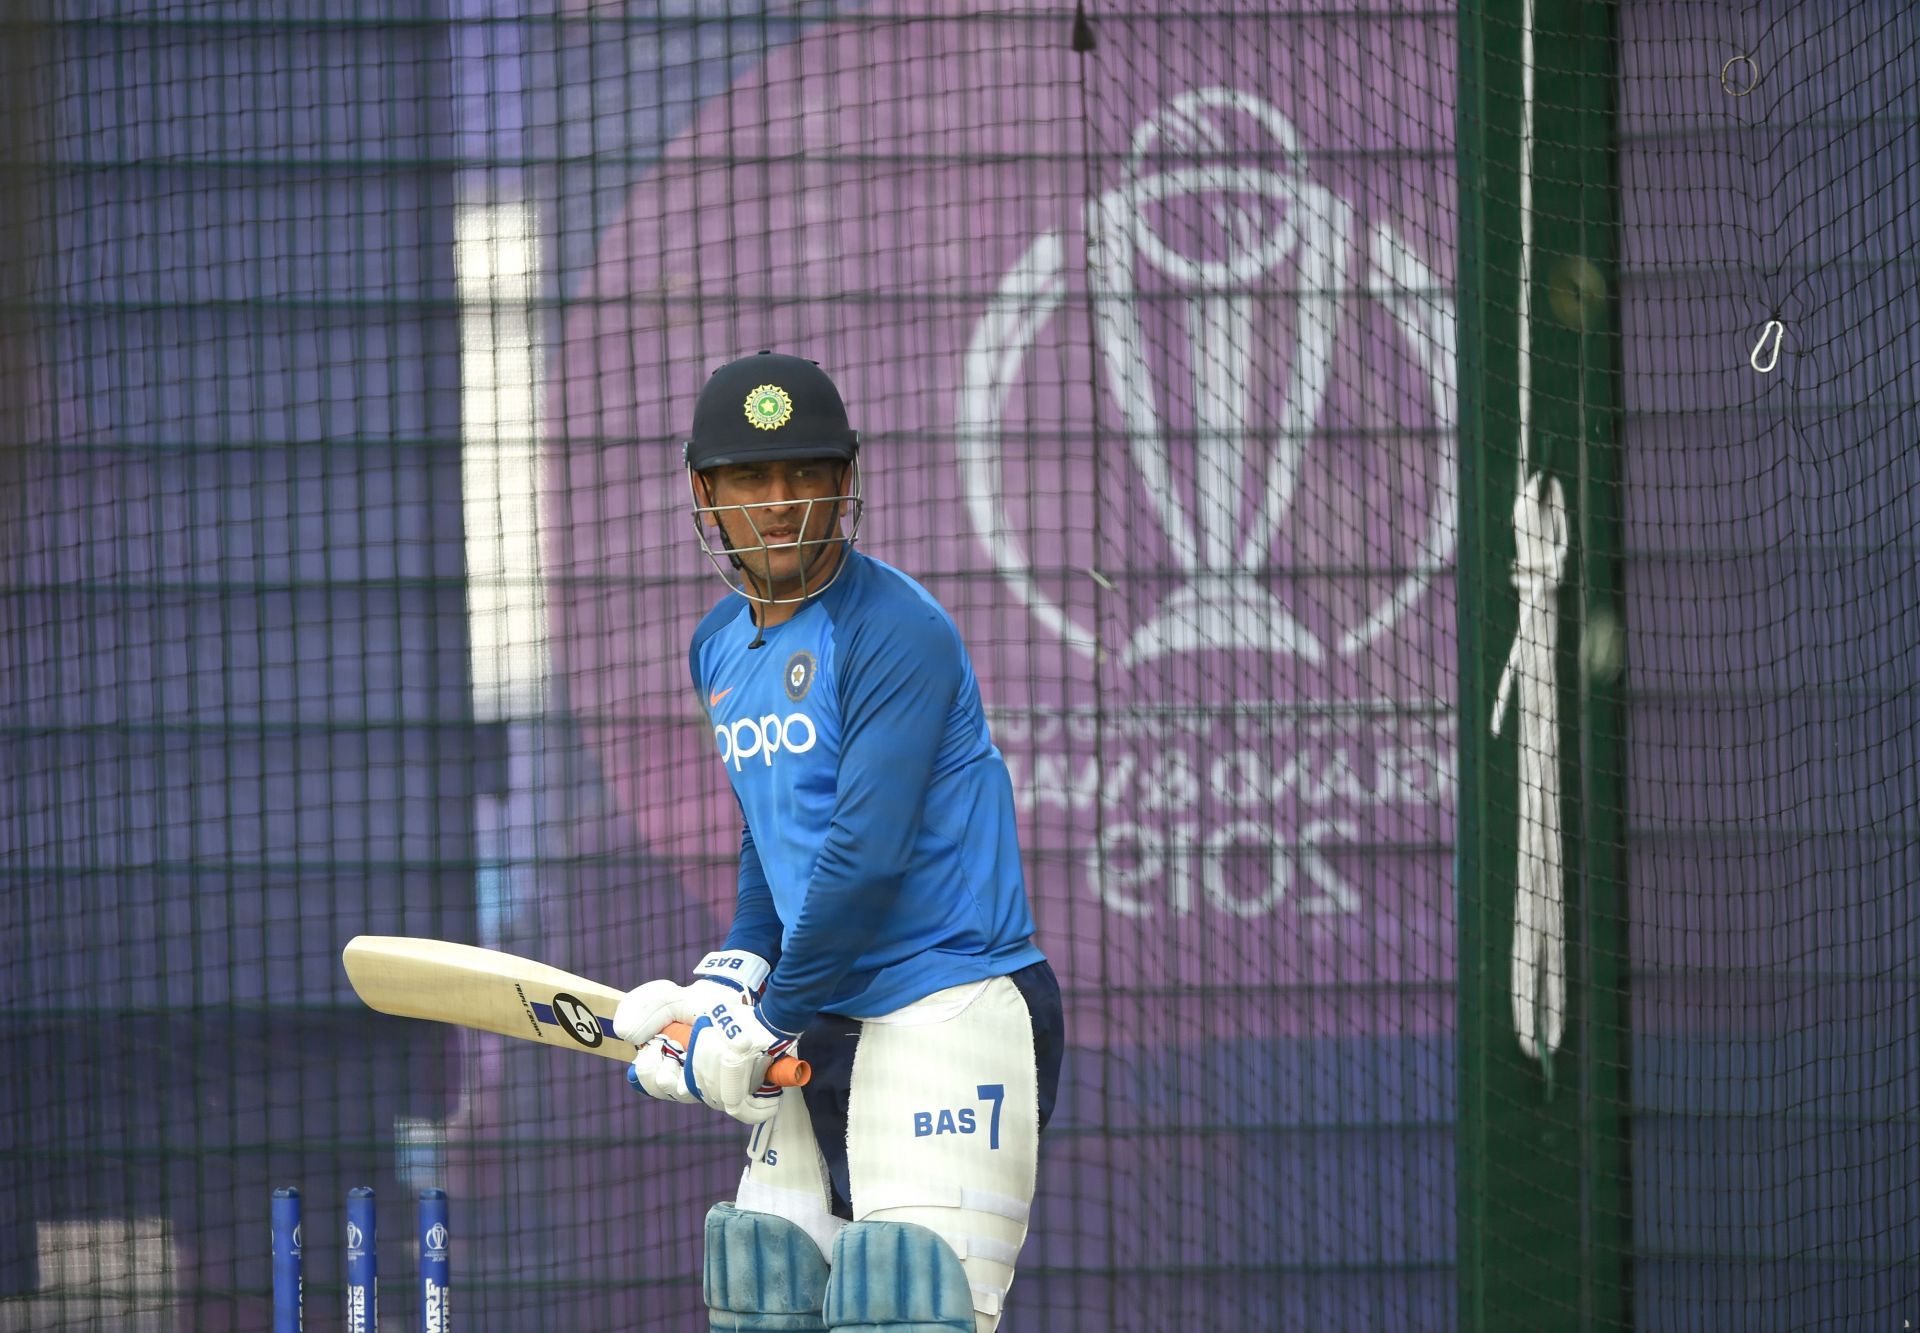 MS Dhoni was retained by the Chennai Super Kings for a sum of 12 crores.